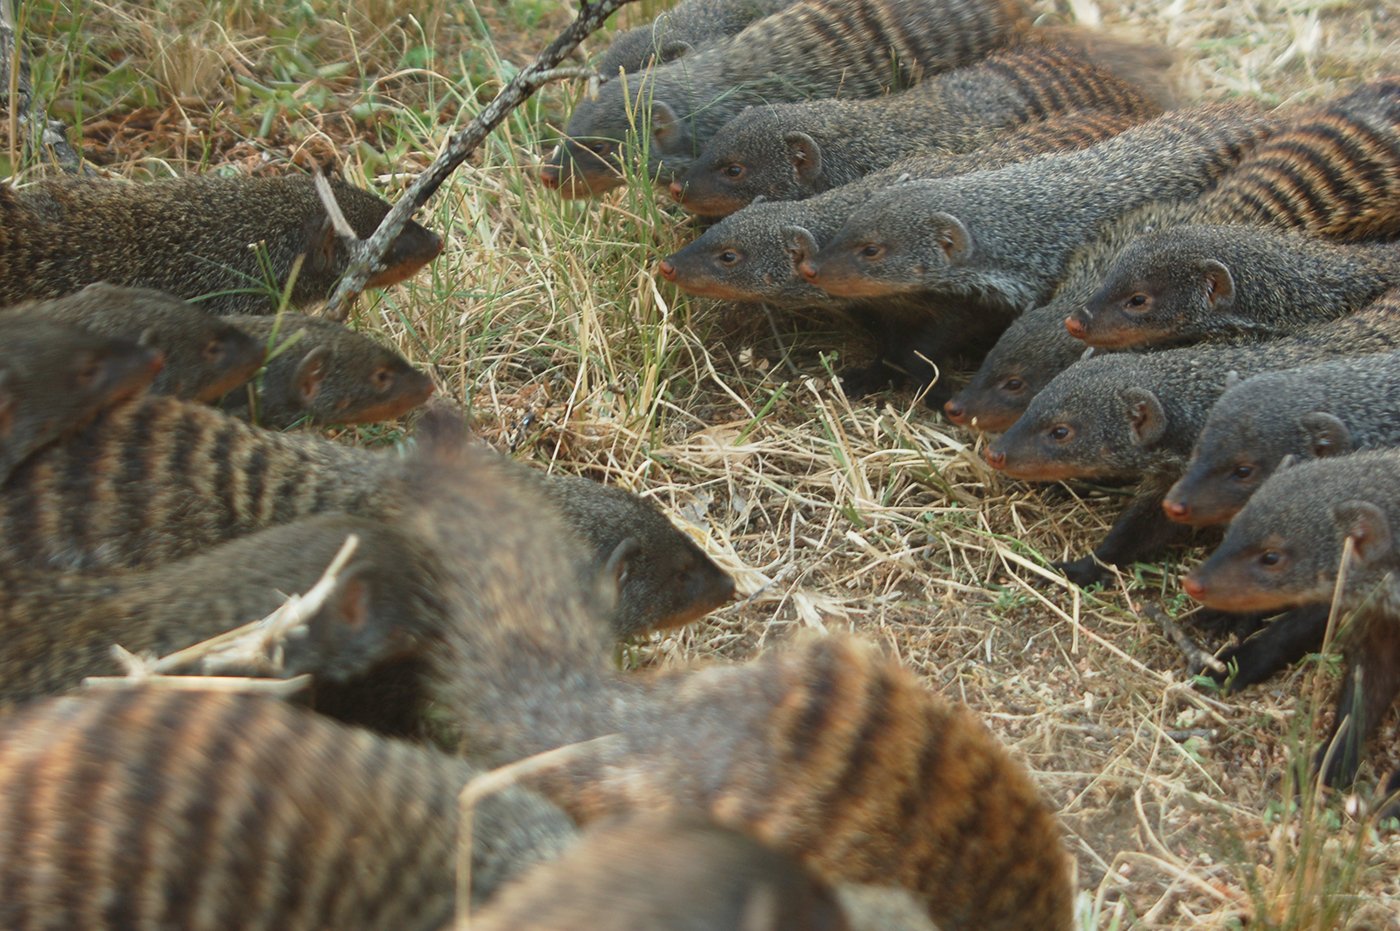 Mongooses, like humans, are among the few mammals that go to war with each another. Image credit - Harry Marshall